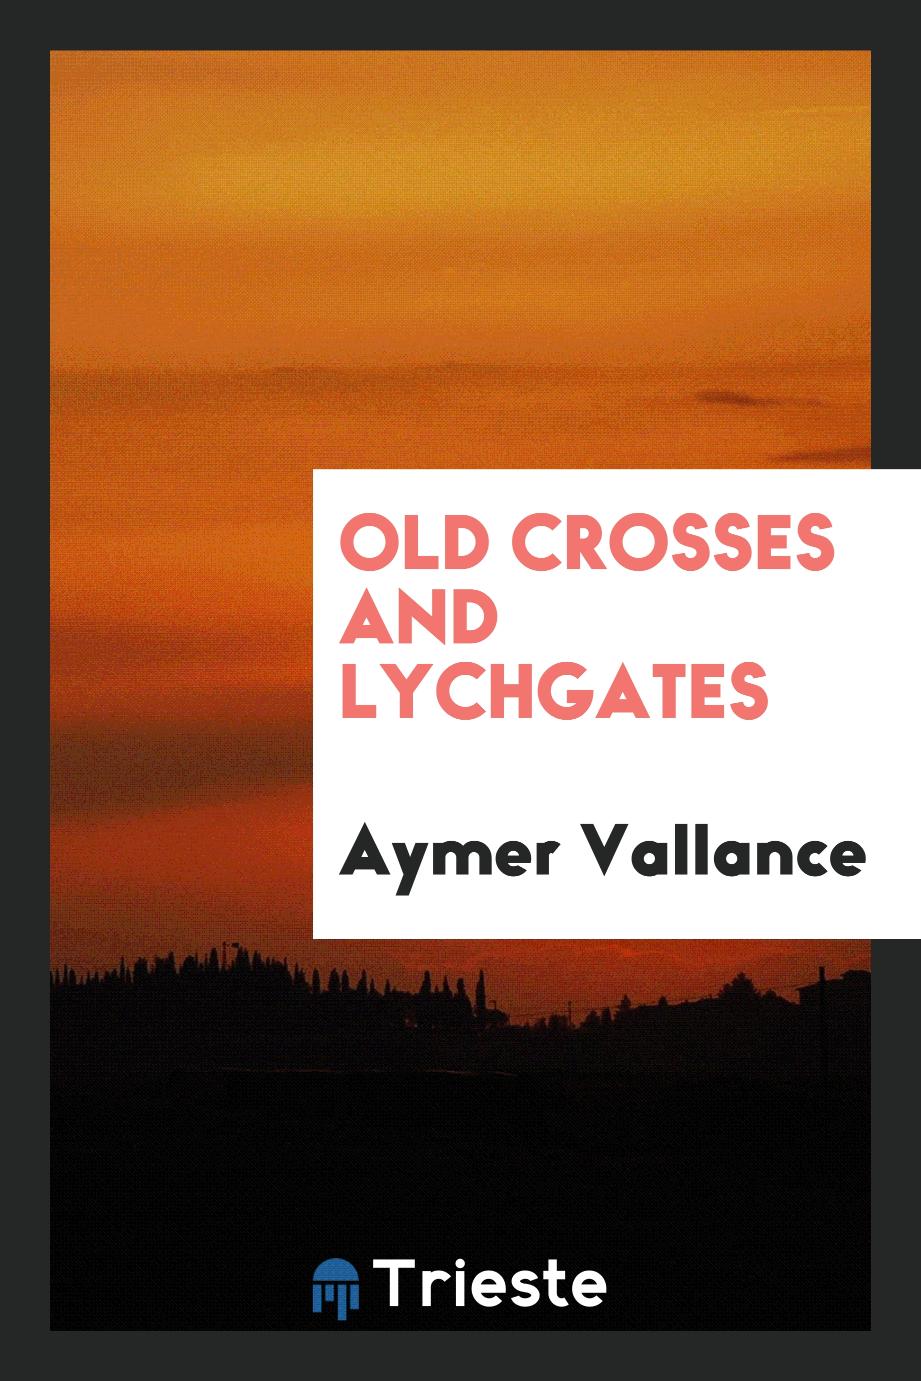 Old crosses and lychgates